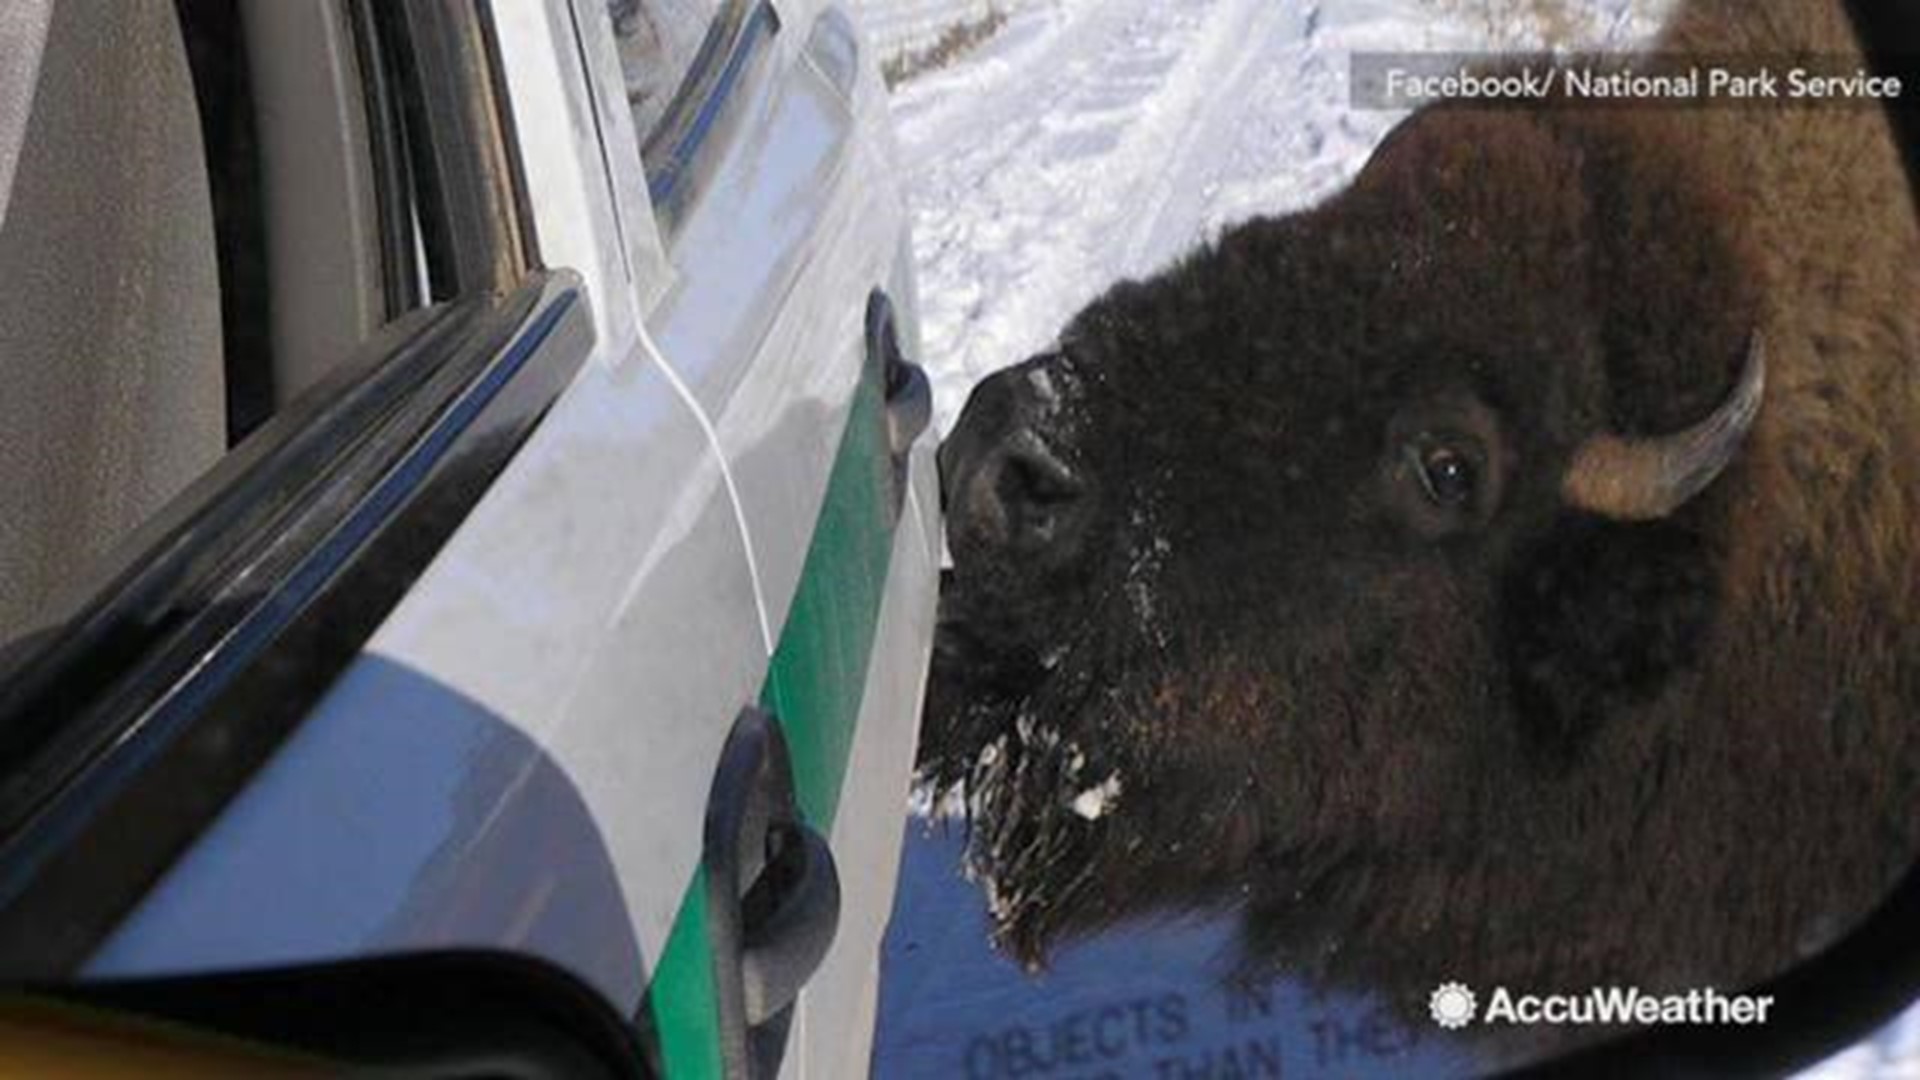 The National Park Service posted a reminder on Facebook to watch out for animals that may lick your vehicles. Some animals are drawn to salt and may approach your vehicle. If this happens, the Park Service says to remain calm and to not engage with the a